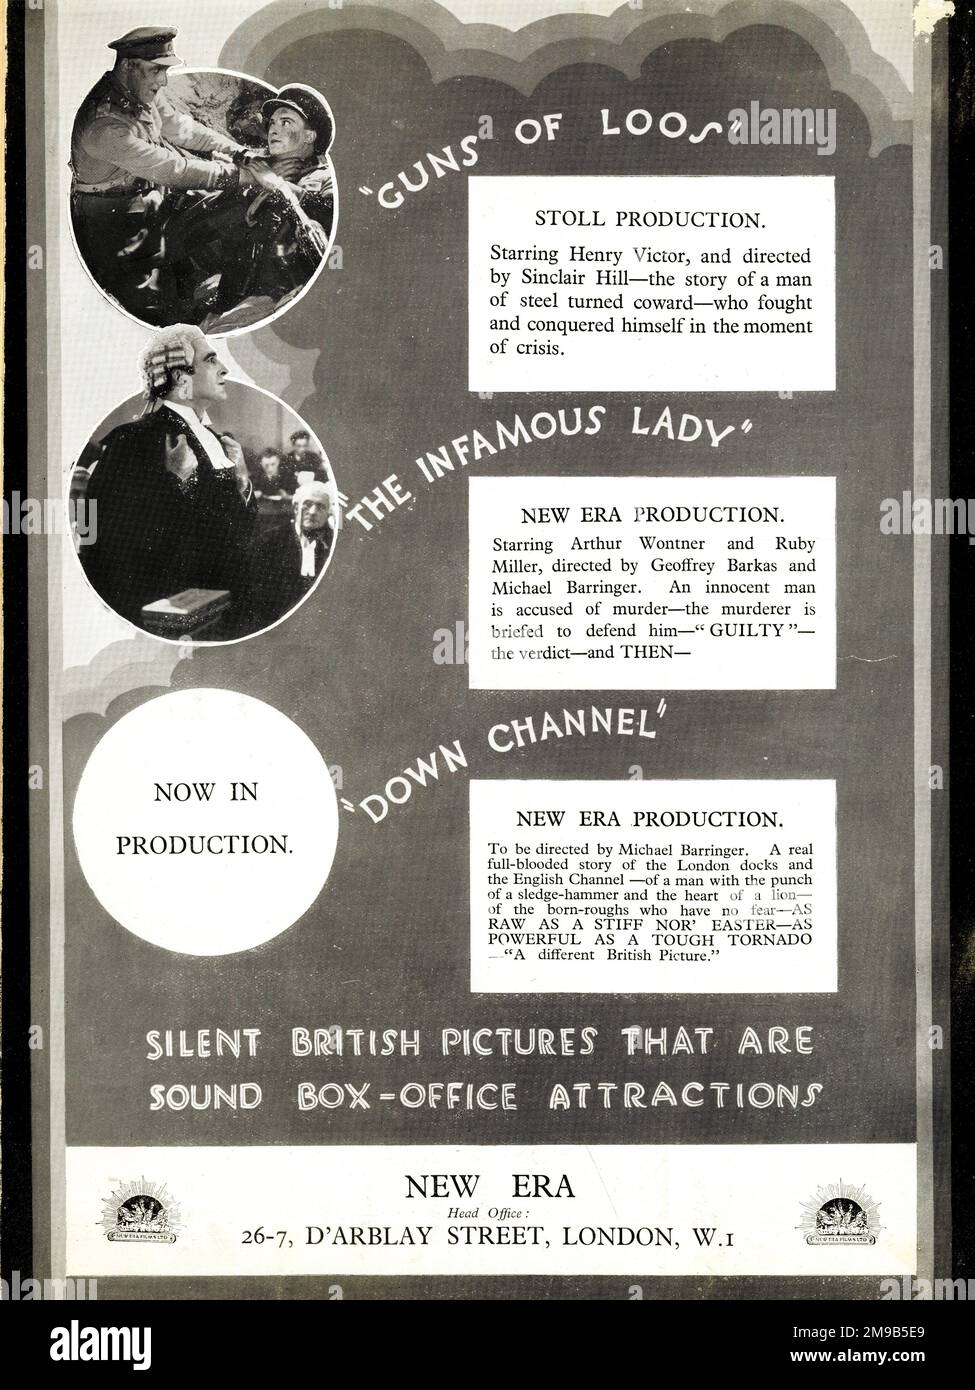 Three silent British films, New Era, D'Arblay Street, London - Guns of Loos, The Infamous Lady, Down Channel   (2 of 2) Stock Photo